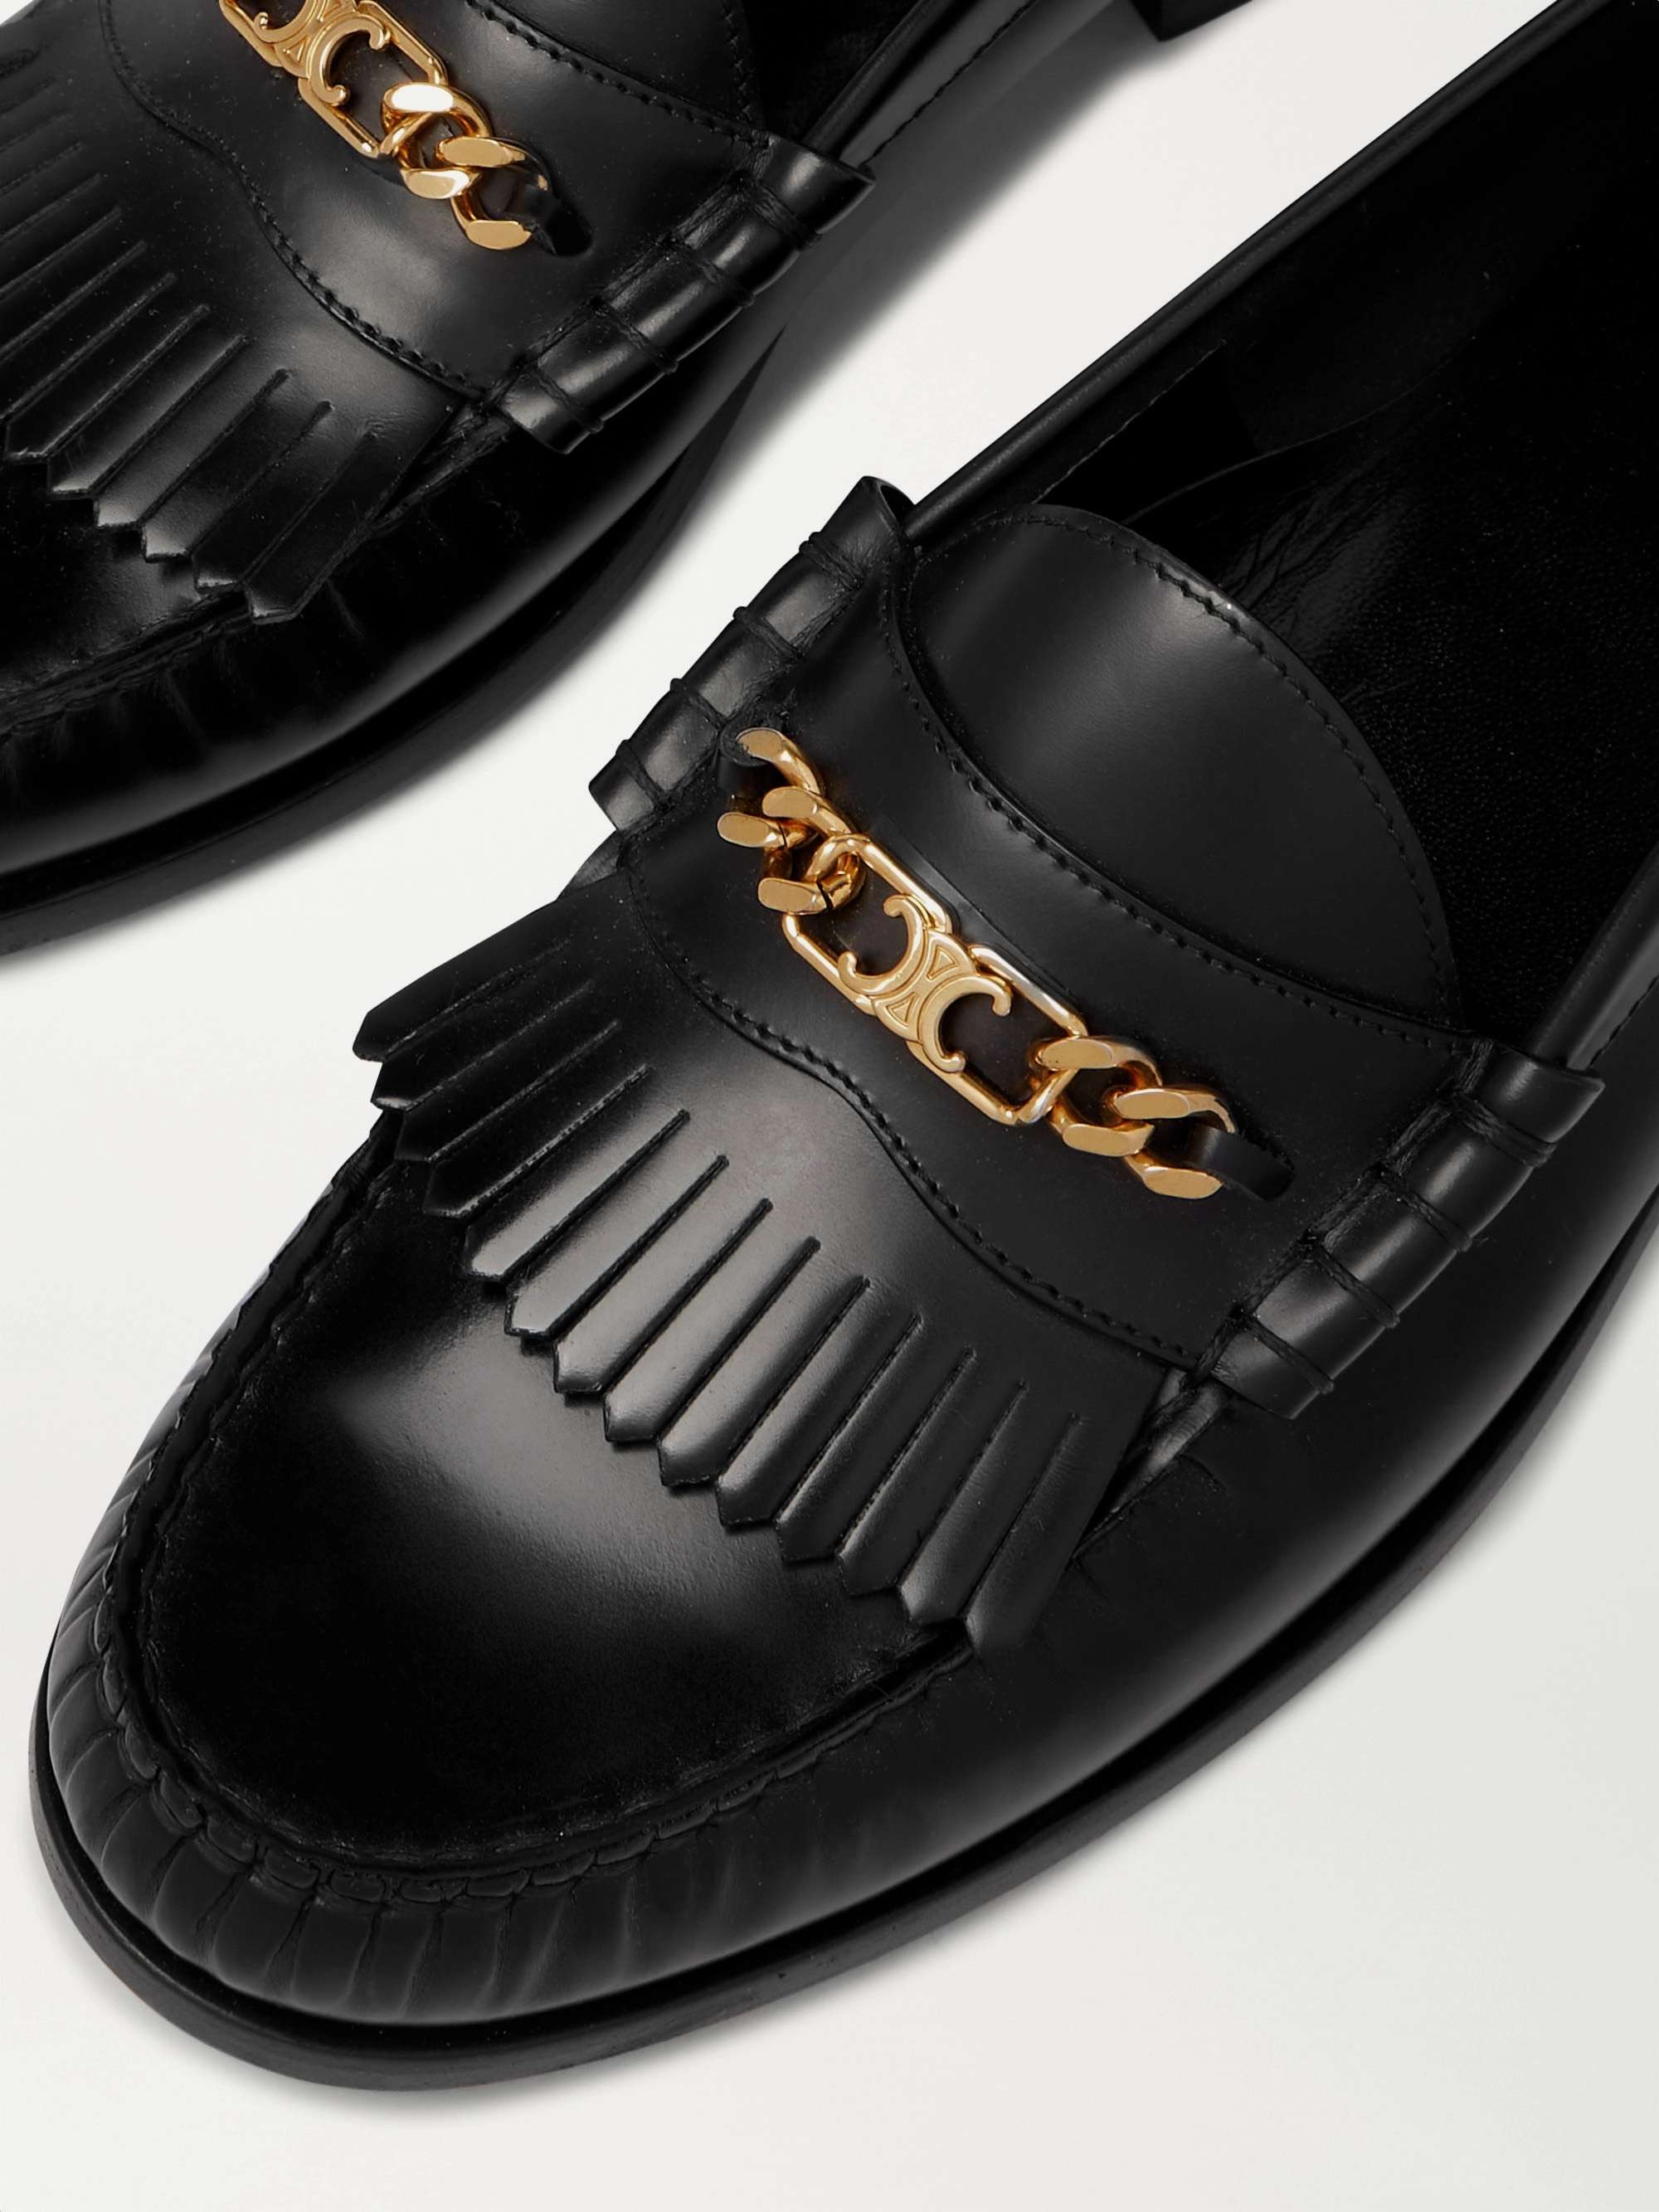 CELINE HOMME Leather Penny Loafers